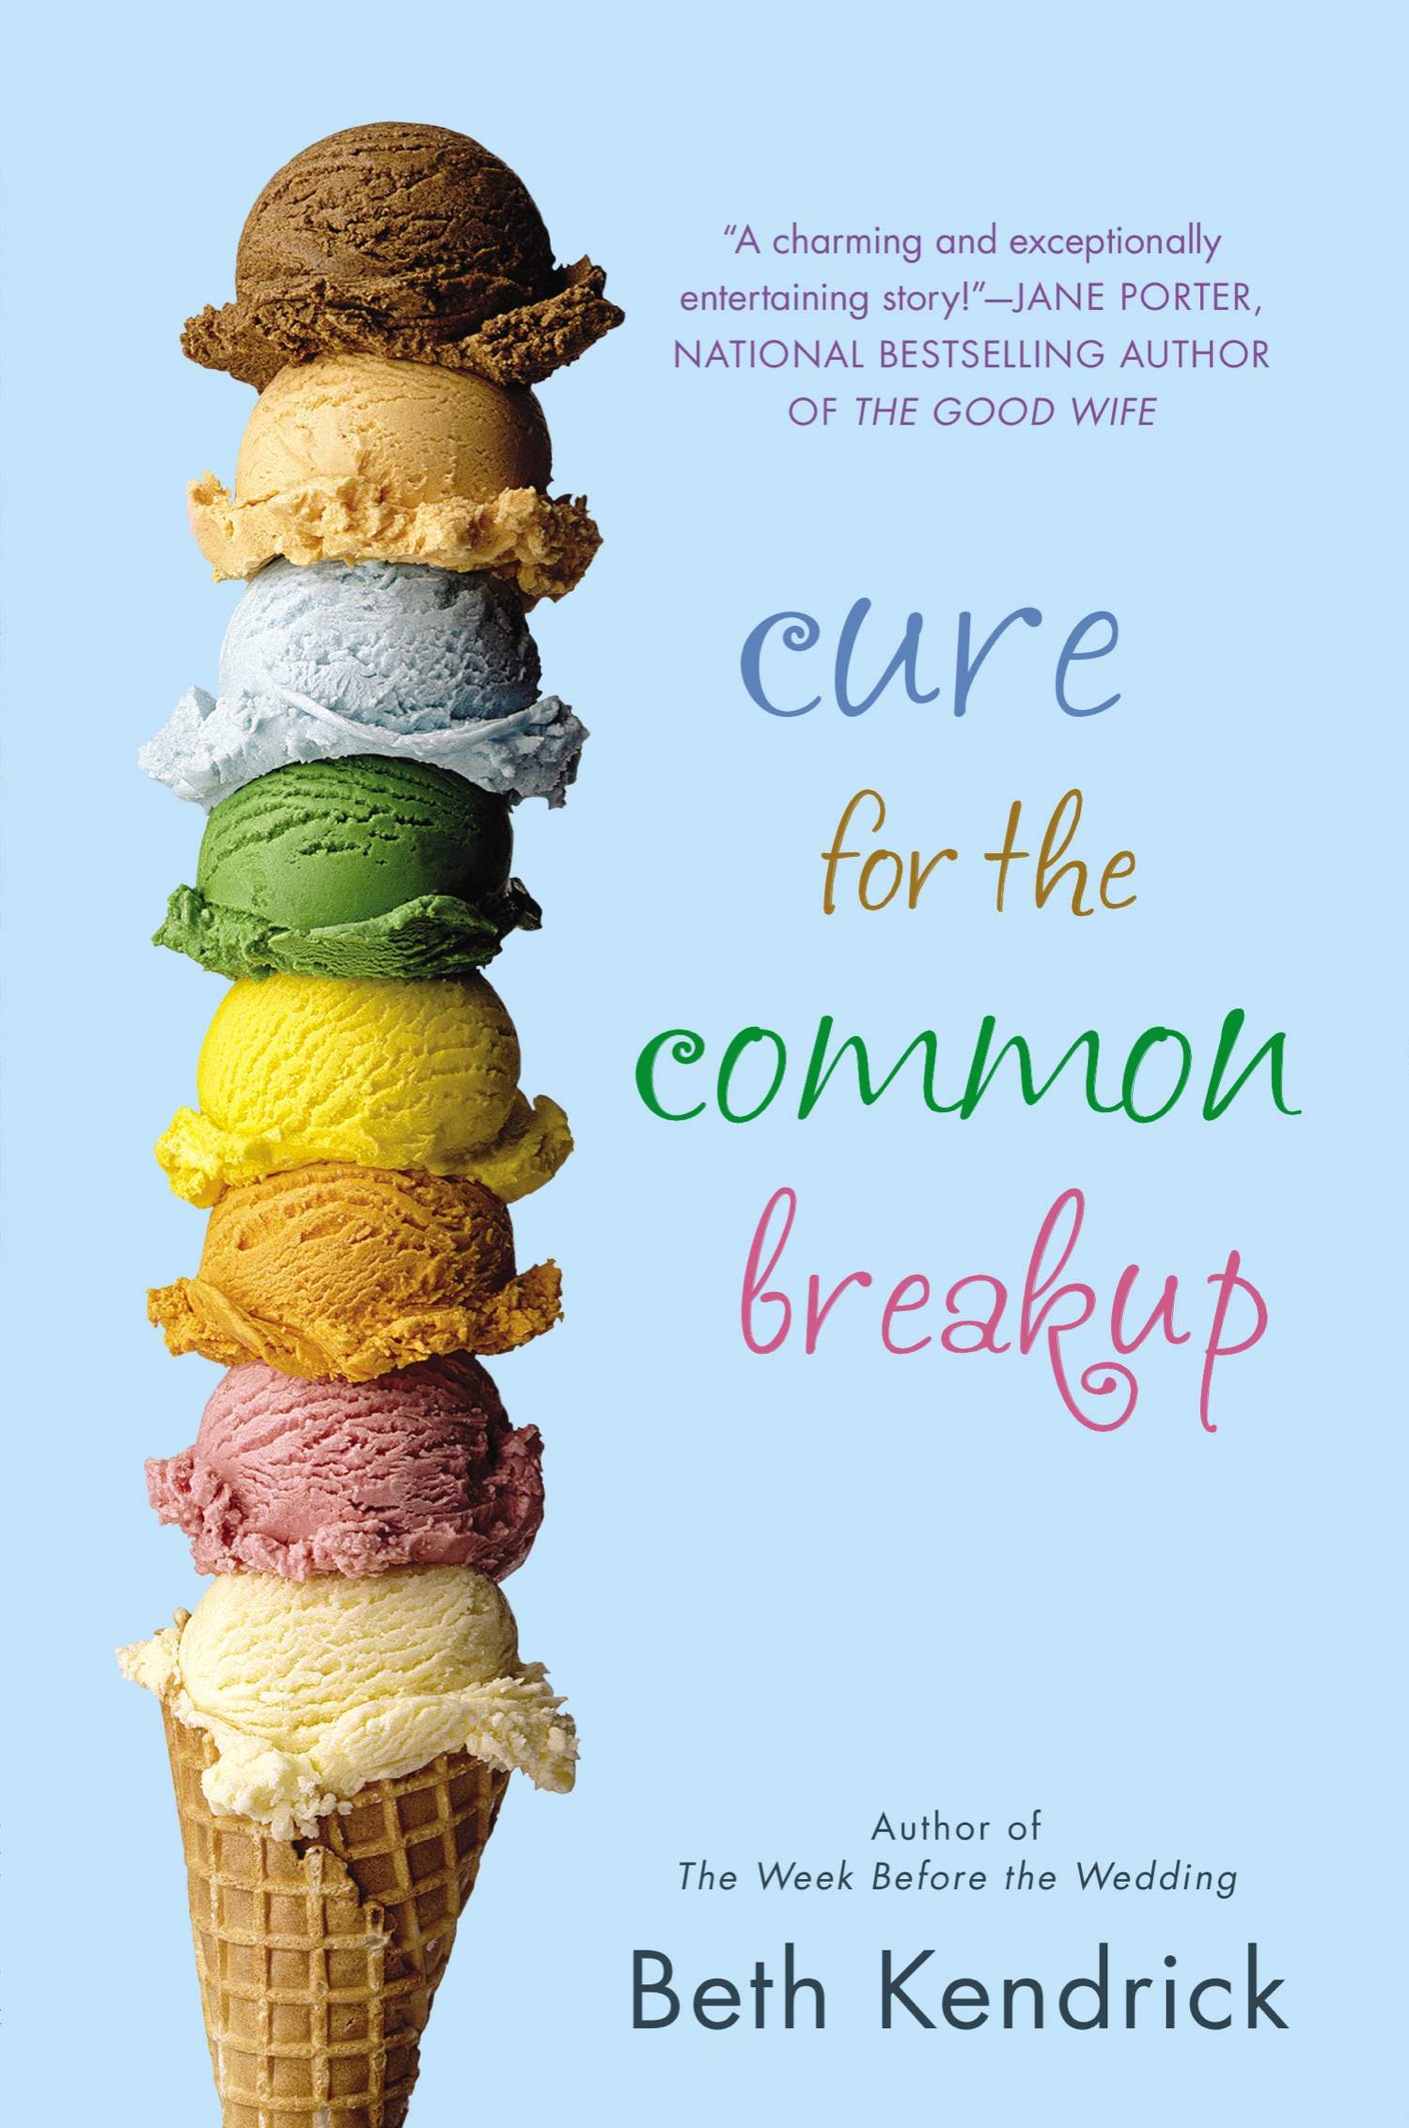 Cure for the Common Breakup (2014) by Beth Kendrick